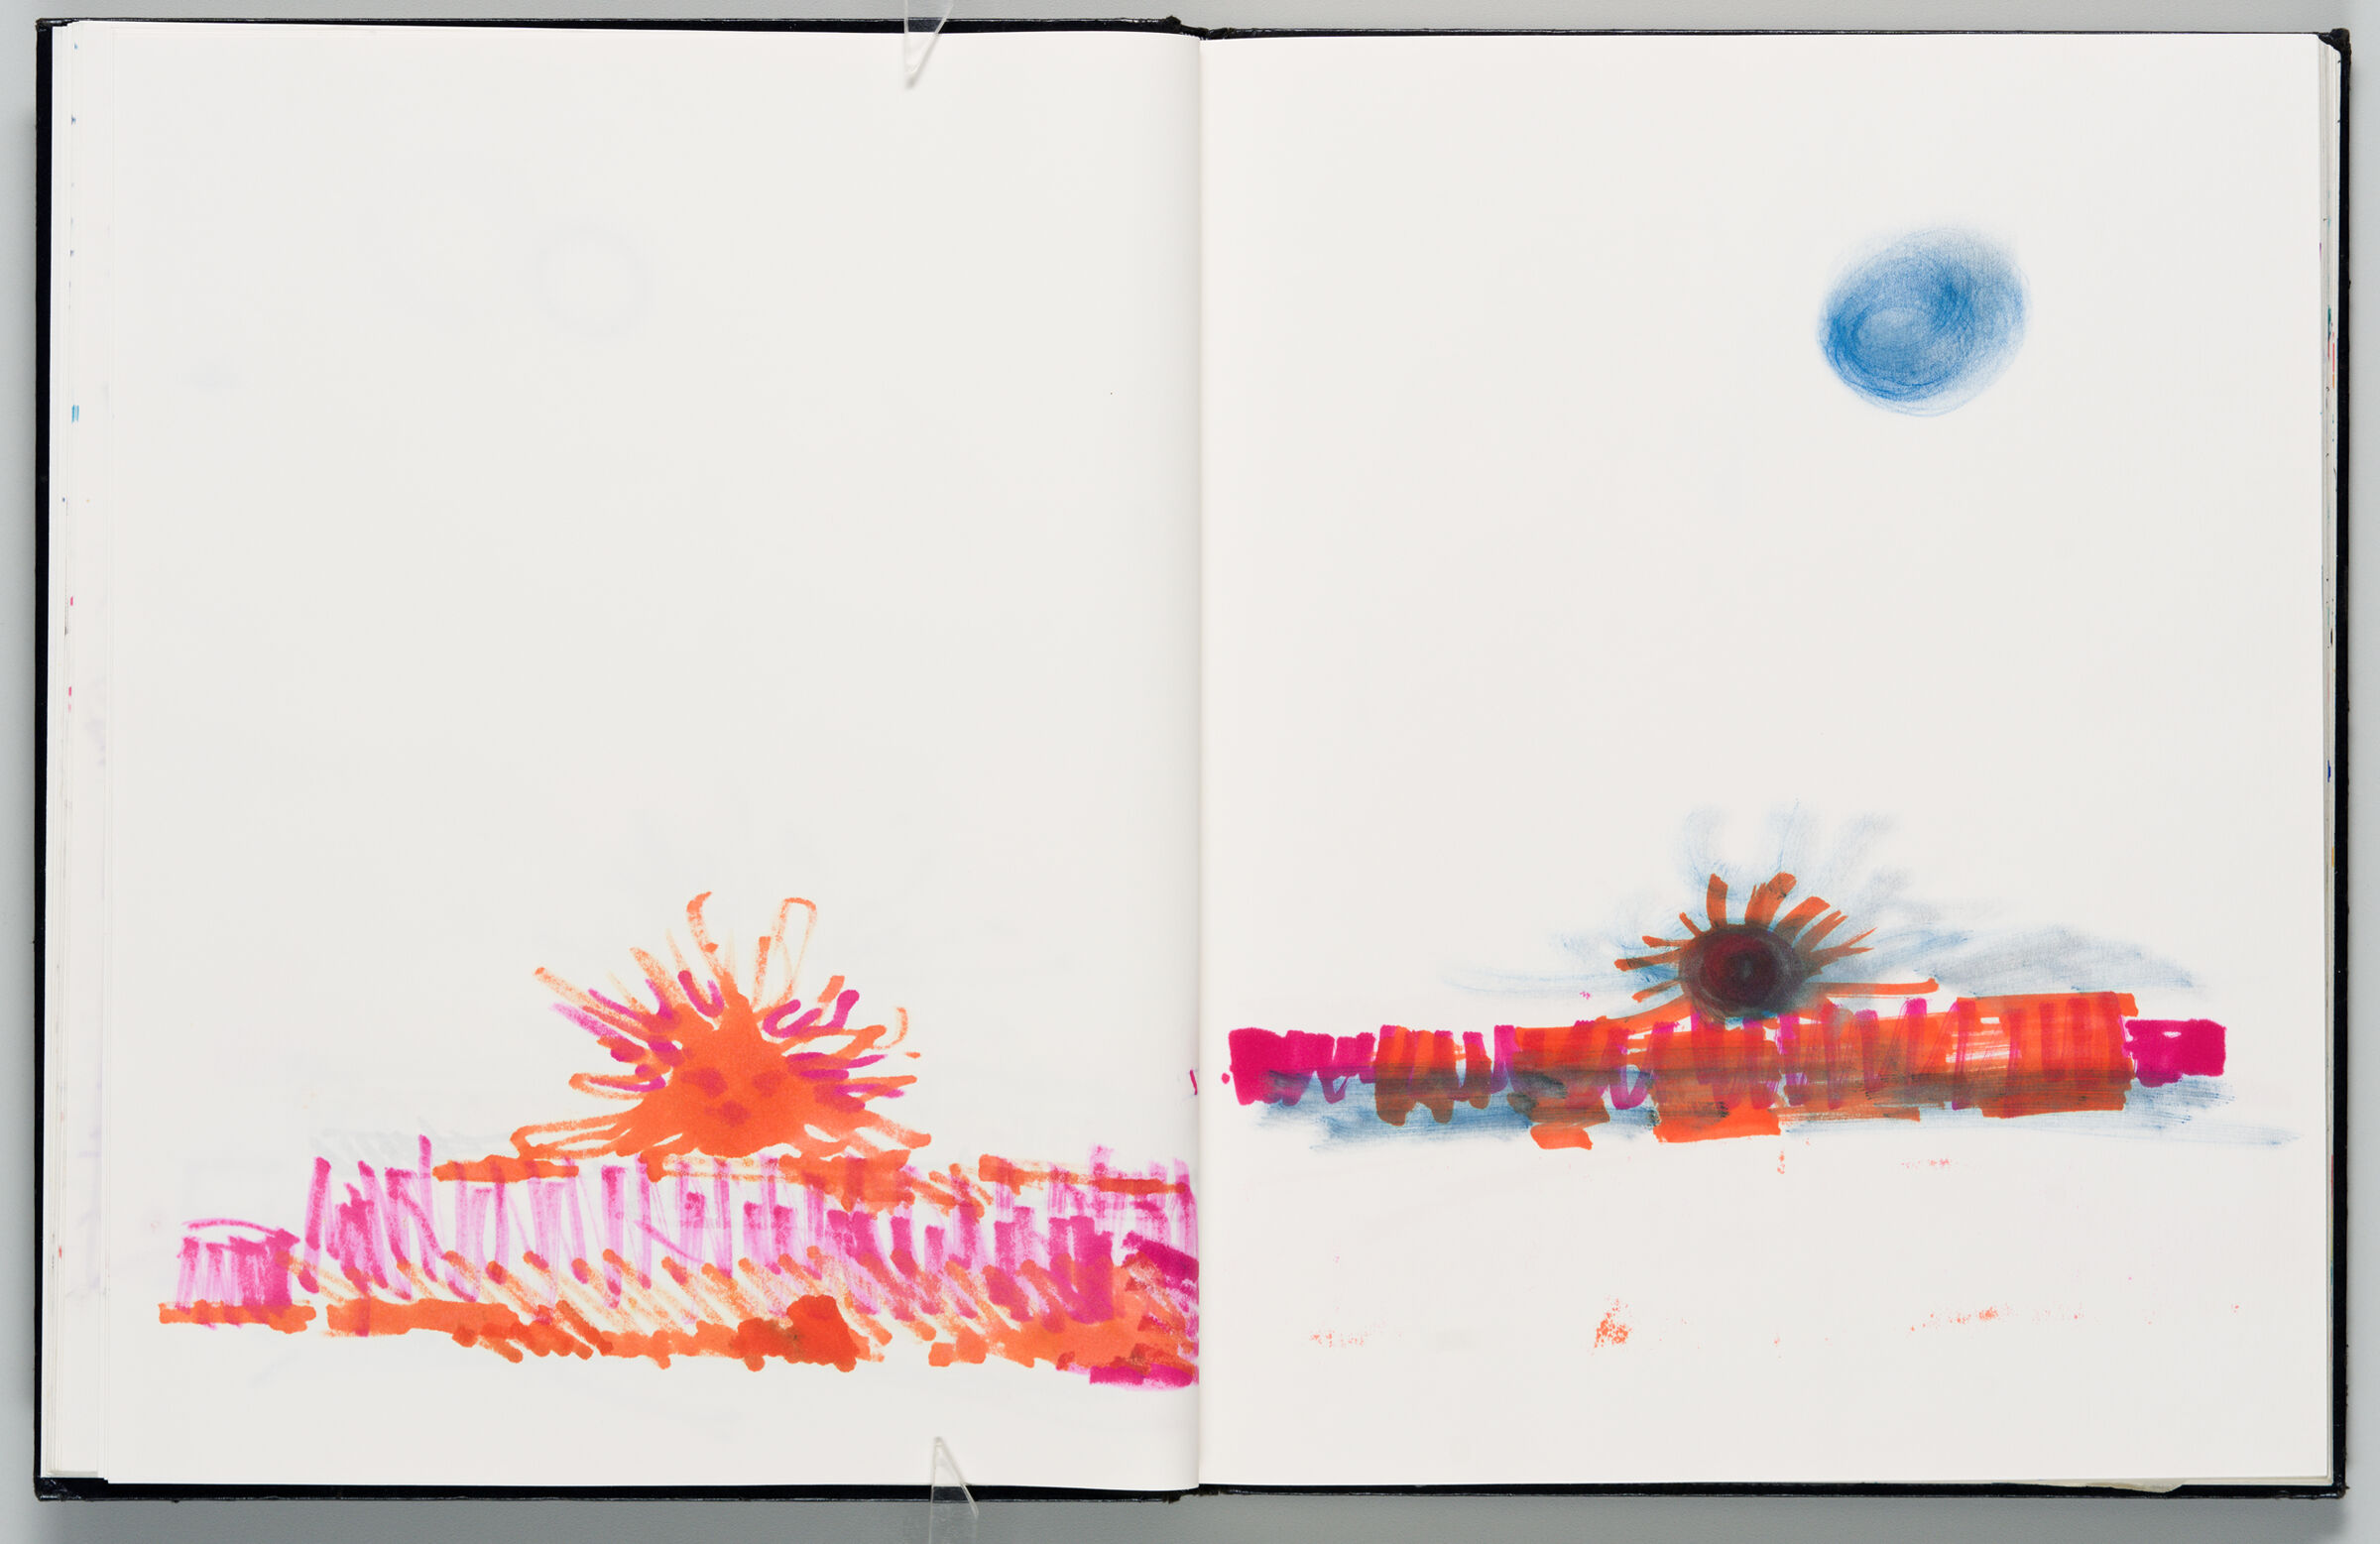 Untitled (Bleed-Through Of Previous Page With Color Transfer, Left Page); Untitled (Sun Design For Installation At Obscure In Quebec City, Right Page)